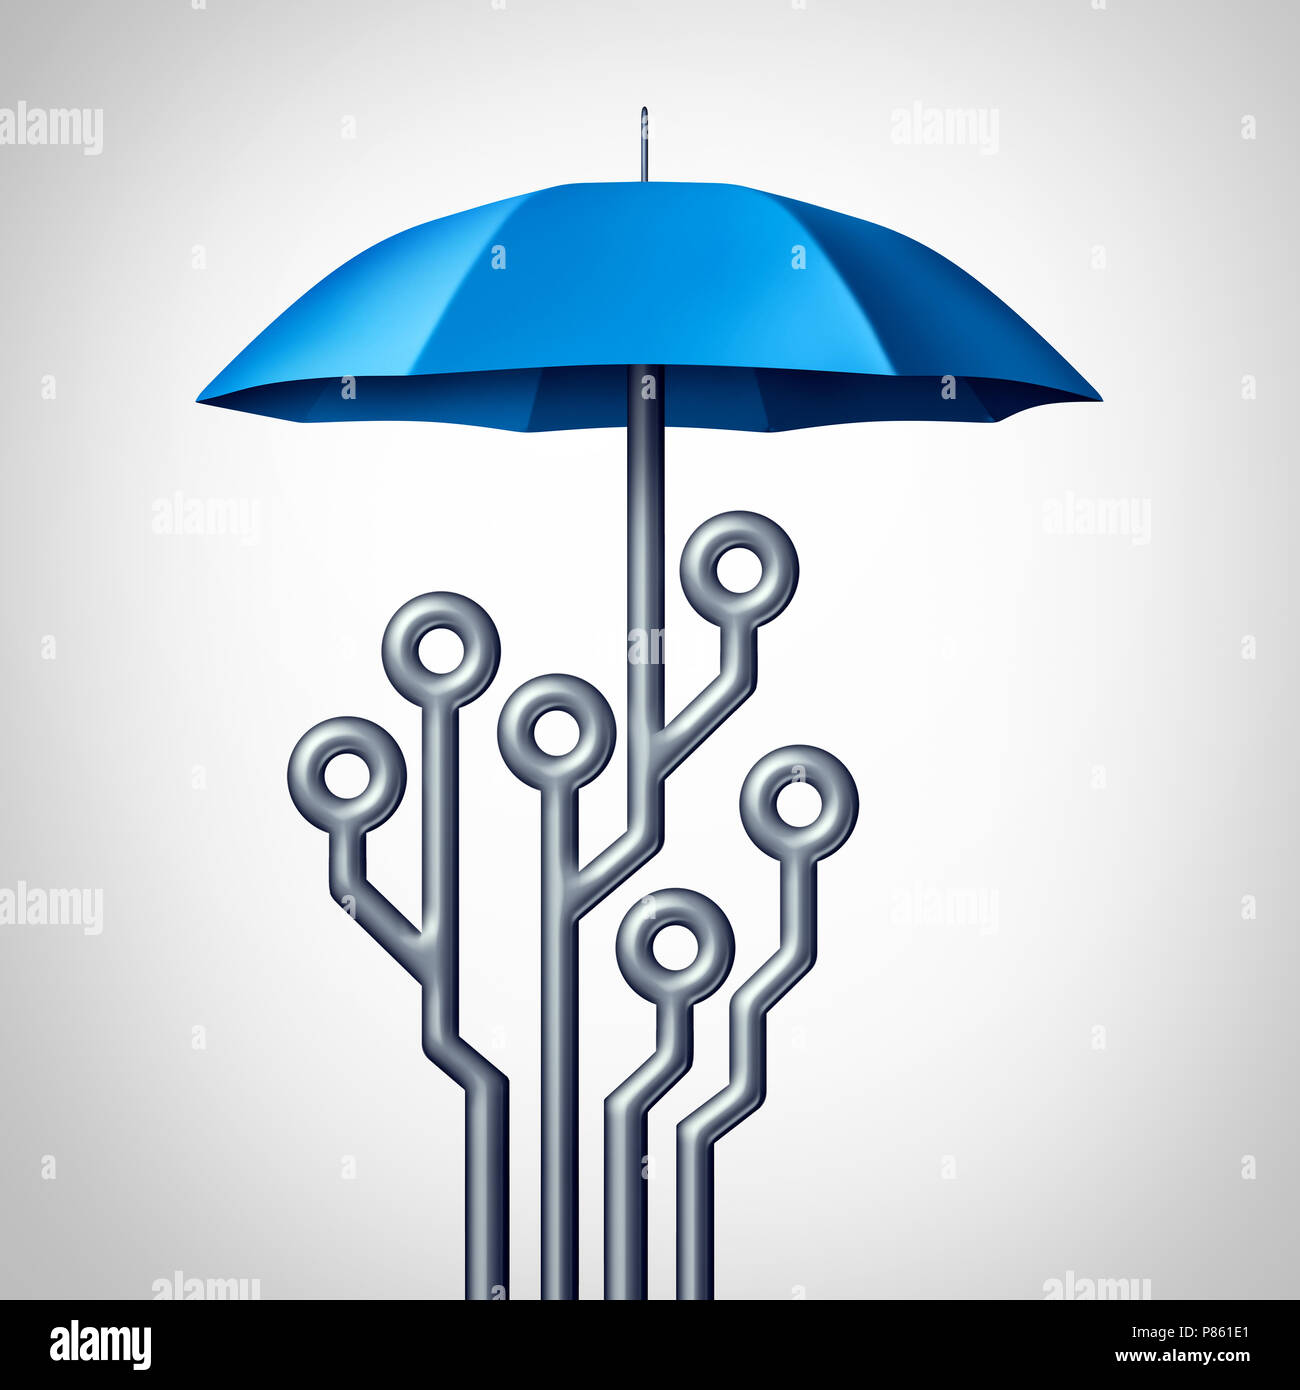 Software protection and antivirus technology security shield symbol as an umbrella shaped as a computing circuit as a 3D render. Stock Photo